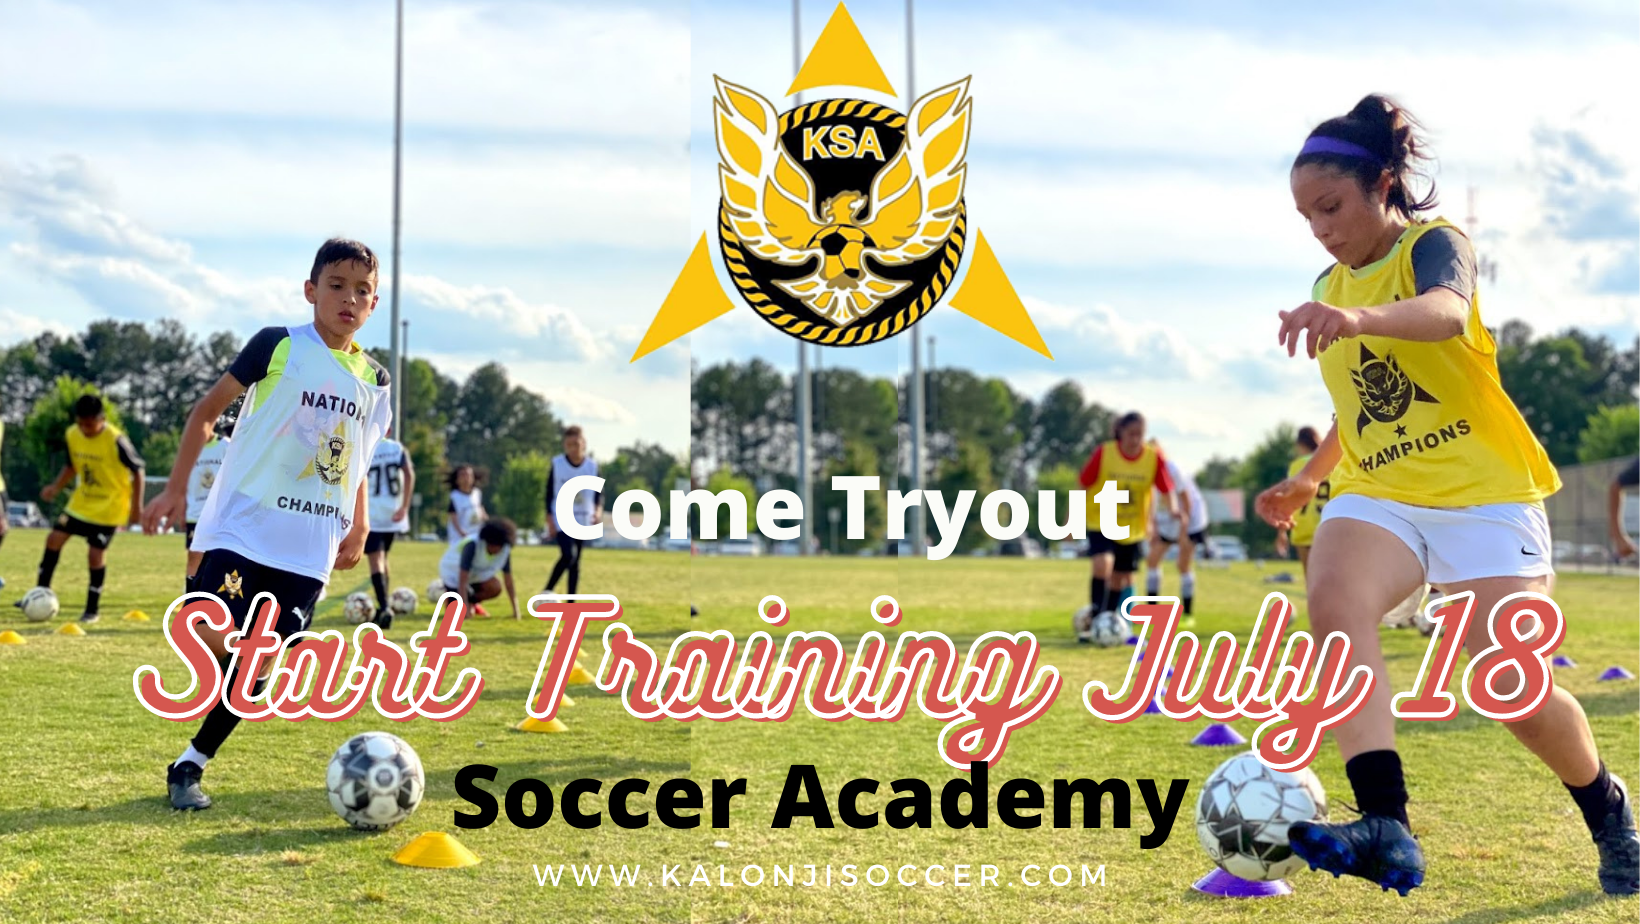 Academy Tryout